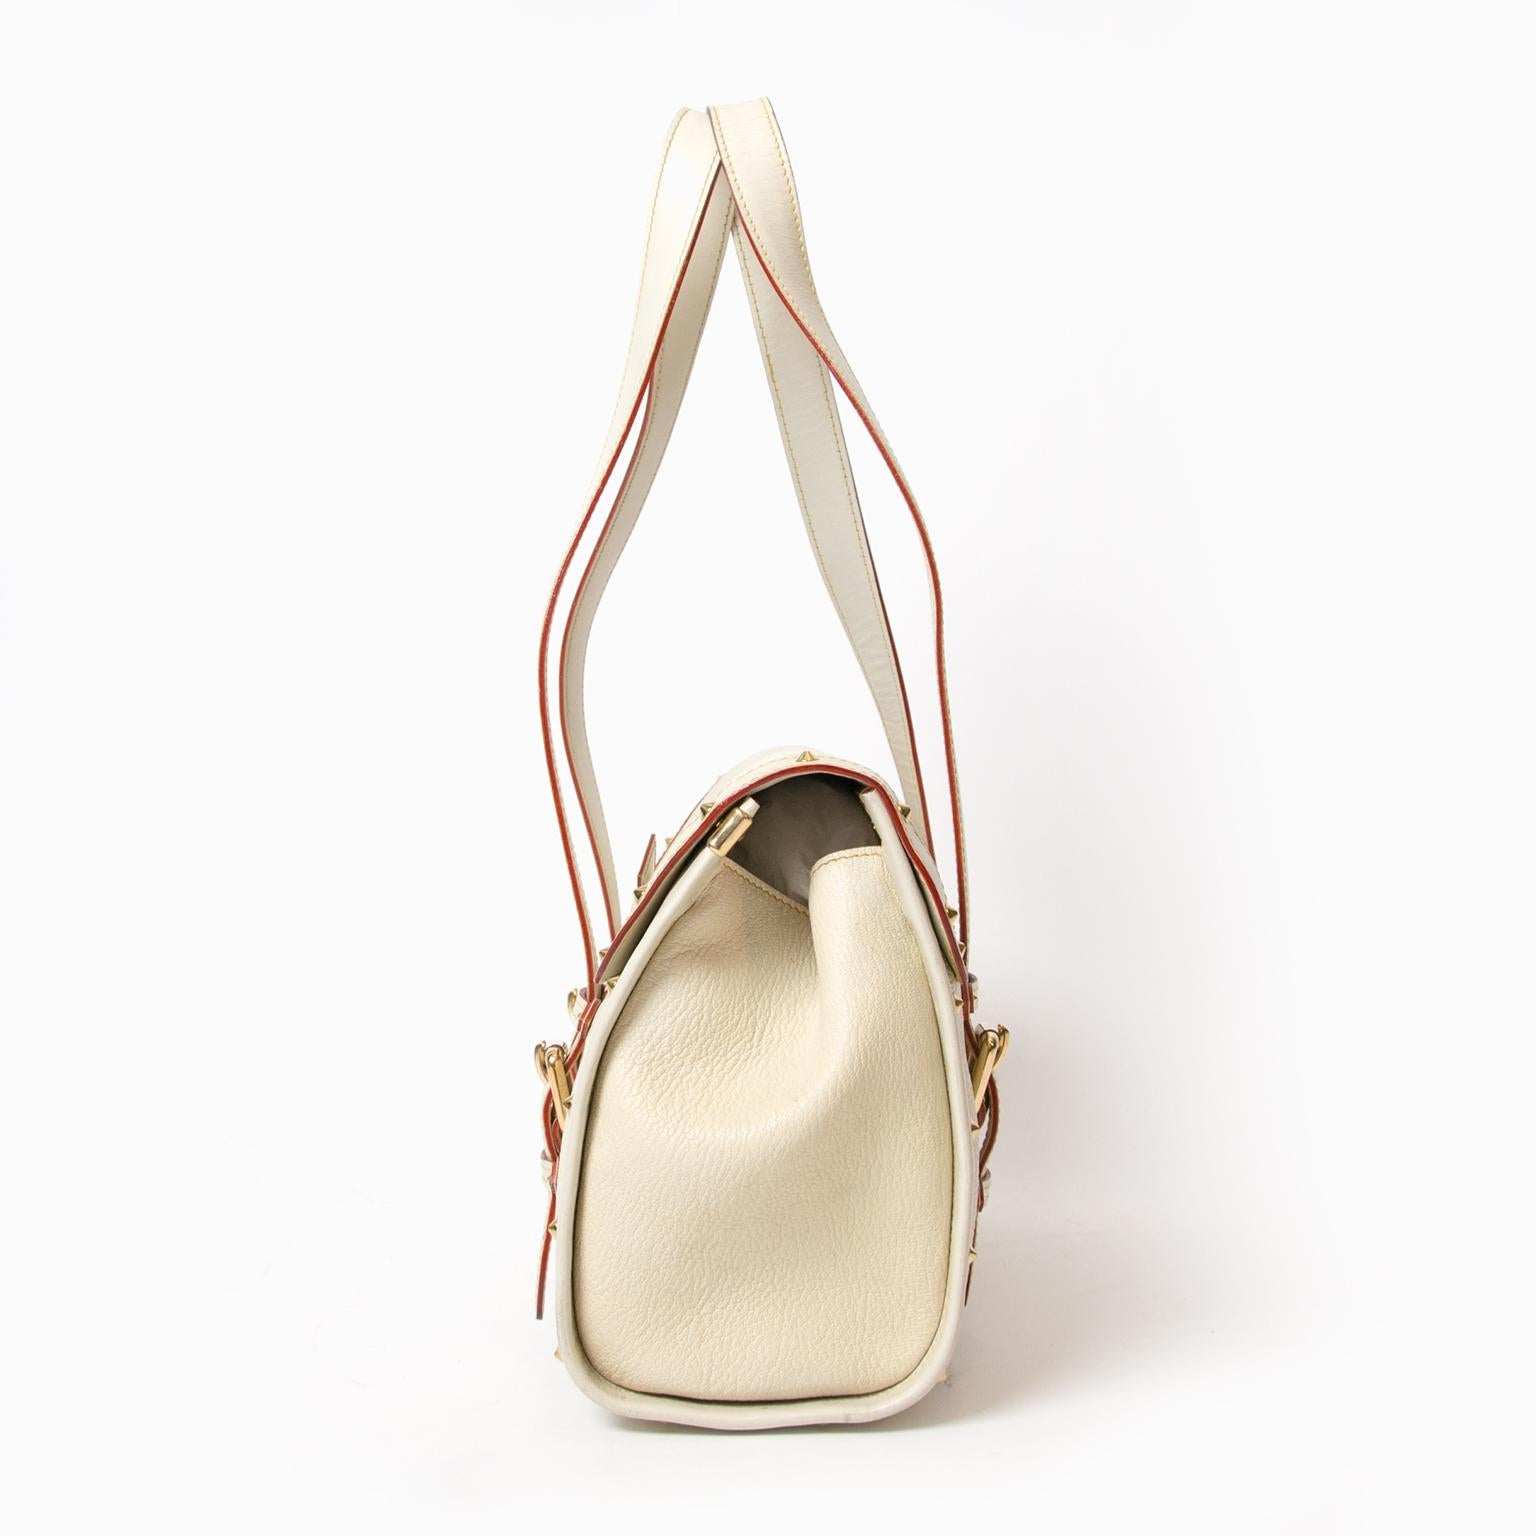 This feminine Louis Vuitton White Suhali Leather L'Epanoui GM Bag is one exquisite bag. It is made of the finest goat leather and has been impeccably handcrafted to create this modern classic style with incredible studded details. A perfectly